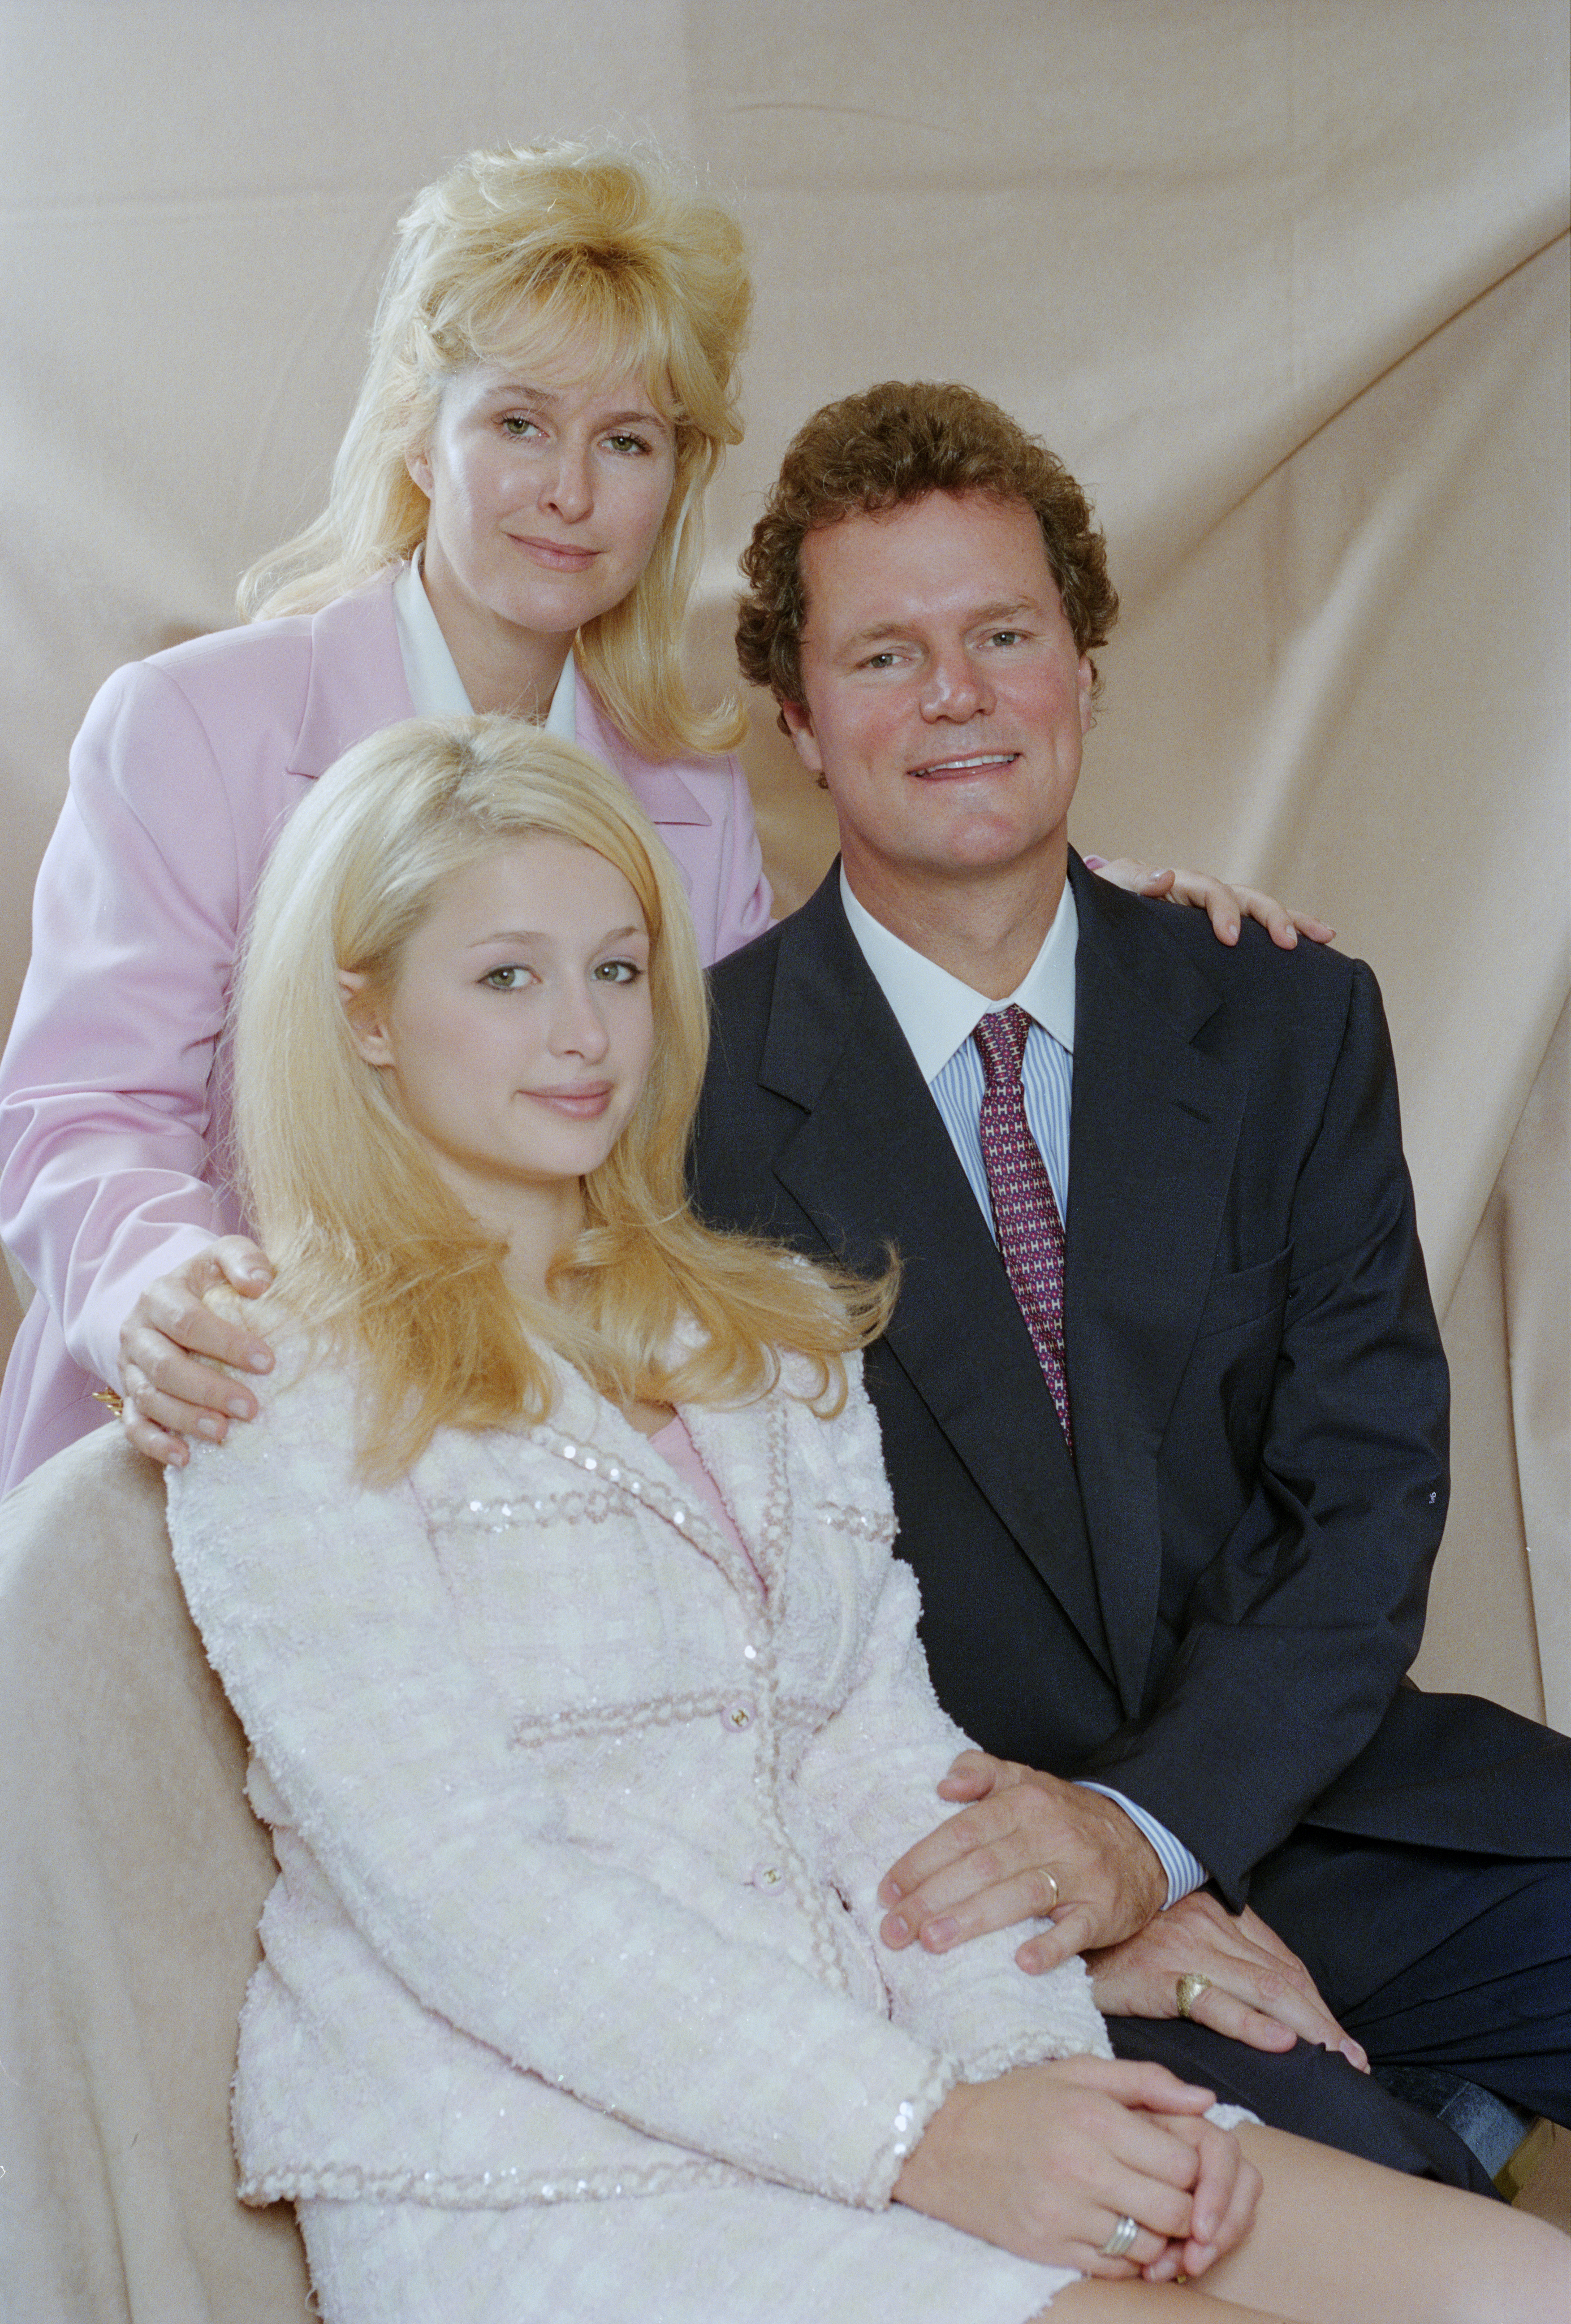 The famous star and her parents posing for a picture on July 5, 1996 | Source: Getty Images